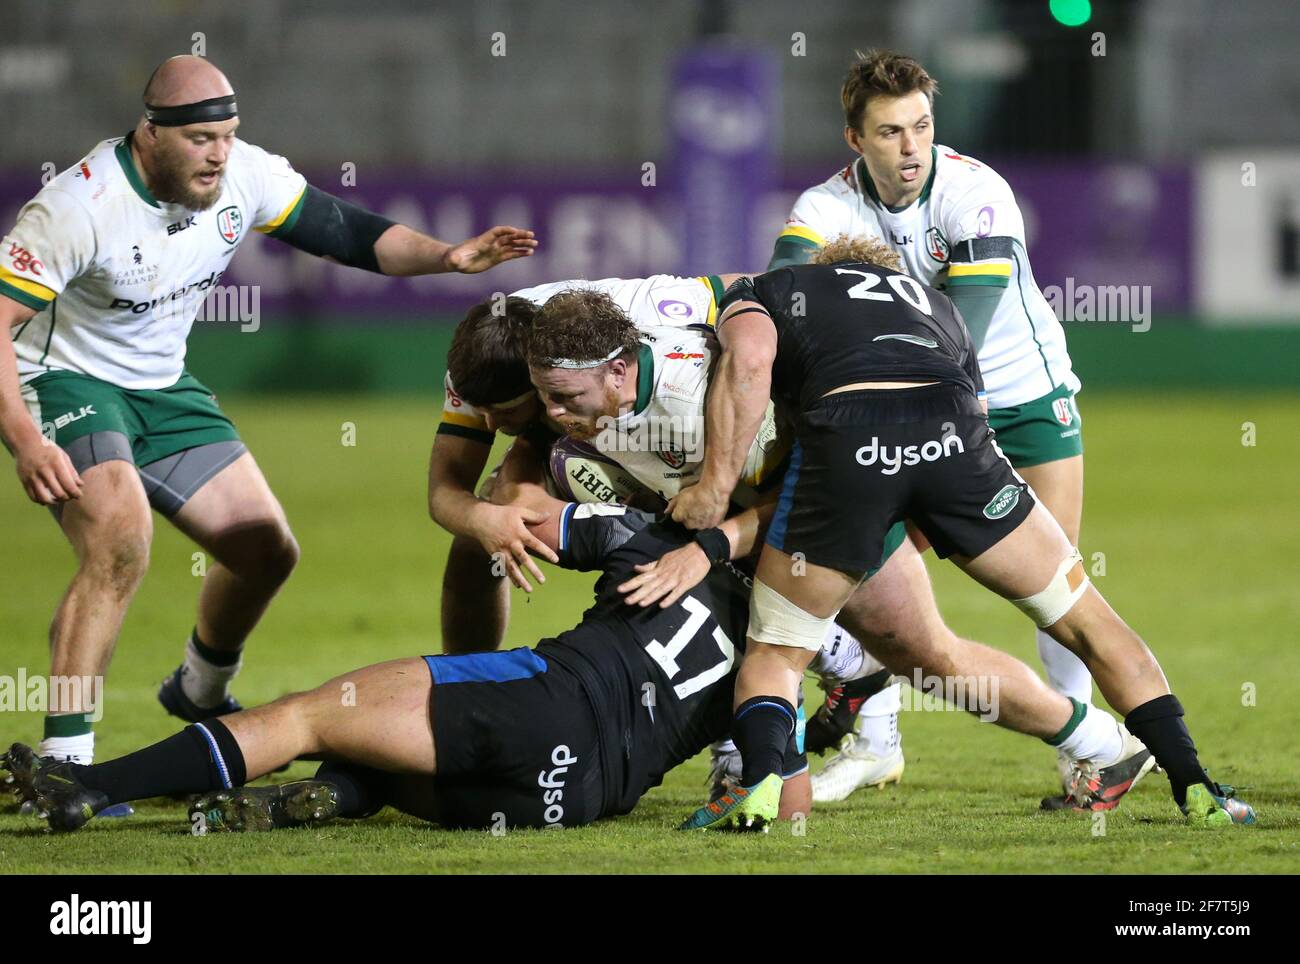 London Irish's Harry Elrington (centre) is tackled by Bath Rugby's Juan Schoeman (left) and Miles Reid (right) during the Challenge Cup, quarter final match at the Recreation Ground, Bath. Picture date: Friday April 9, 2021. Stock Photo